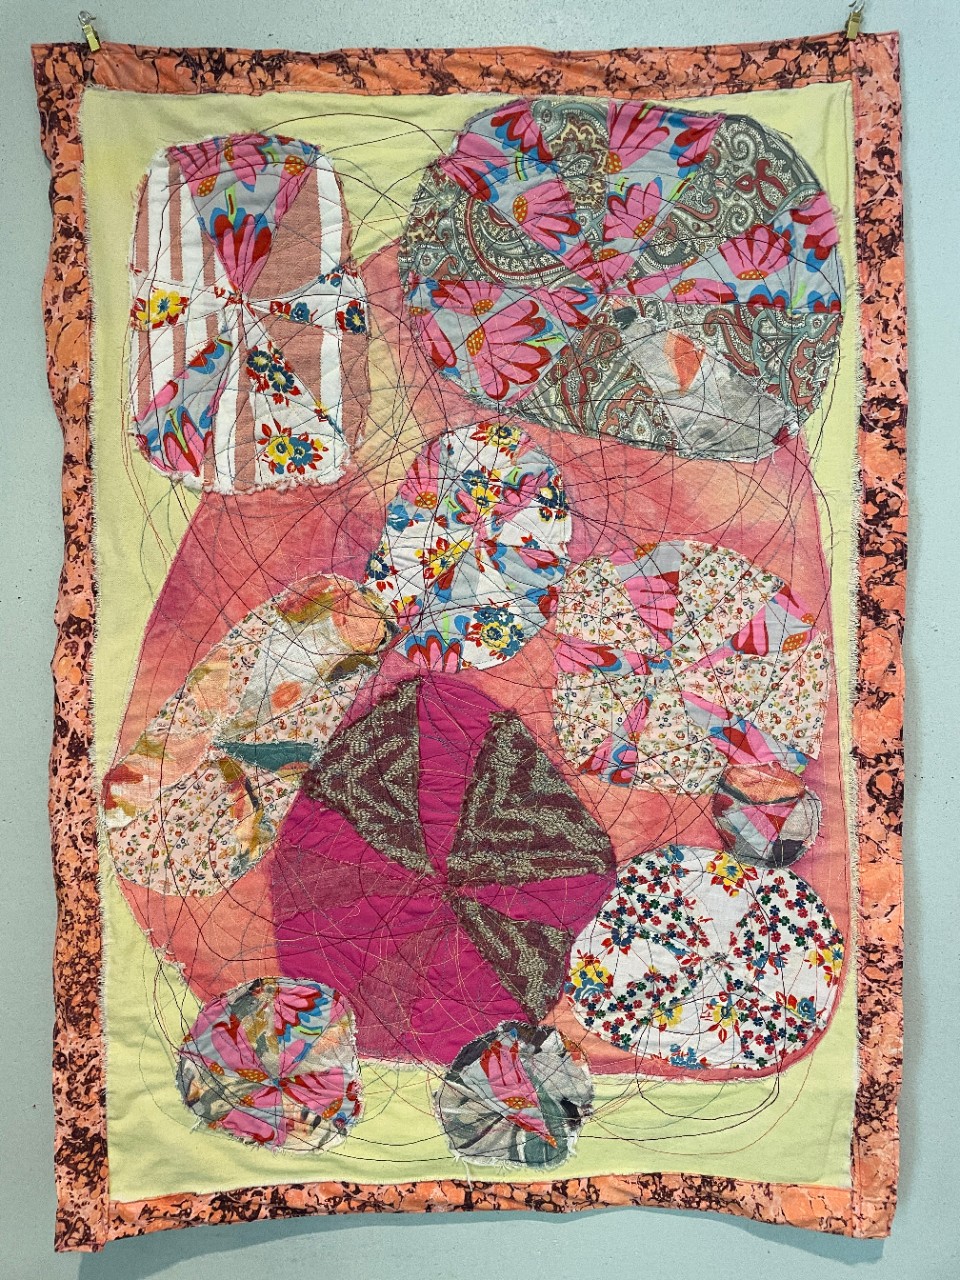 a photo of a quilt made out of several different floral patterns, many of them in shades of pink, displayed hanging on a wall.